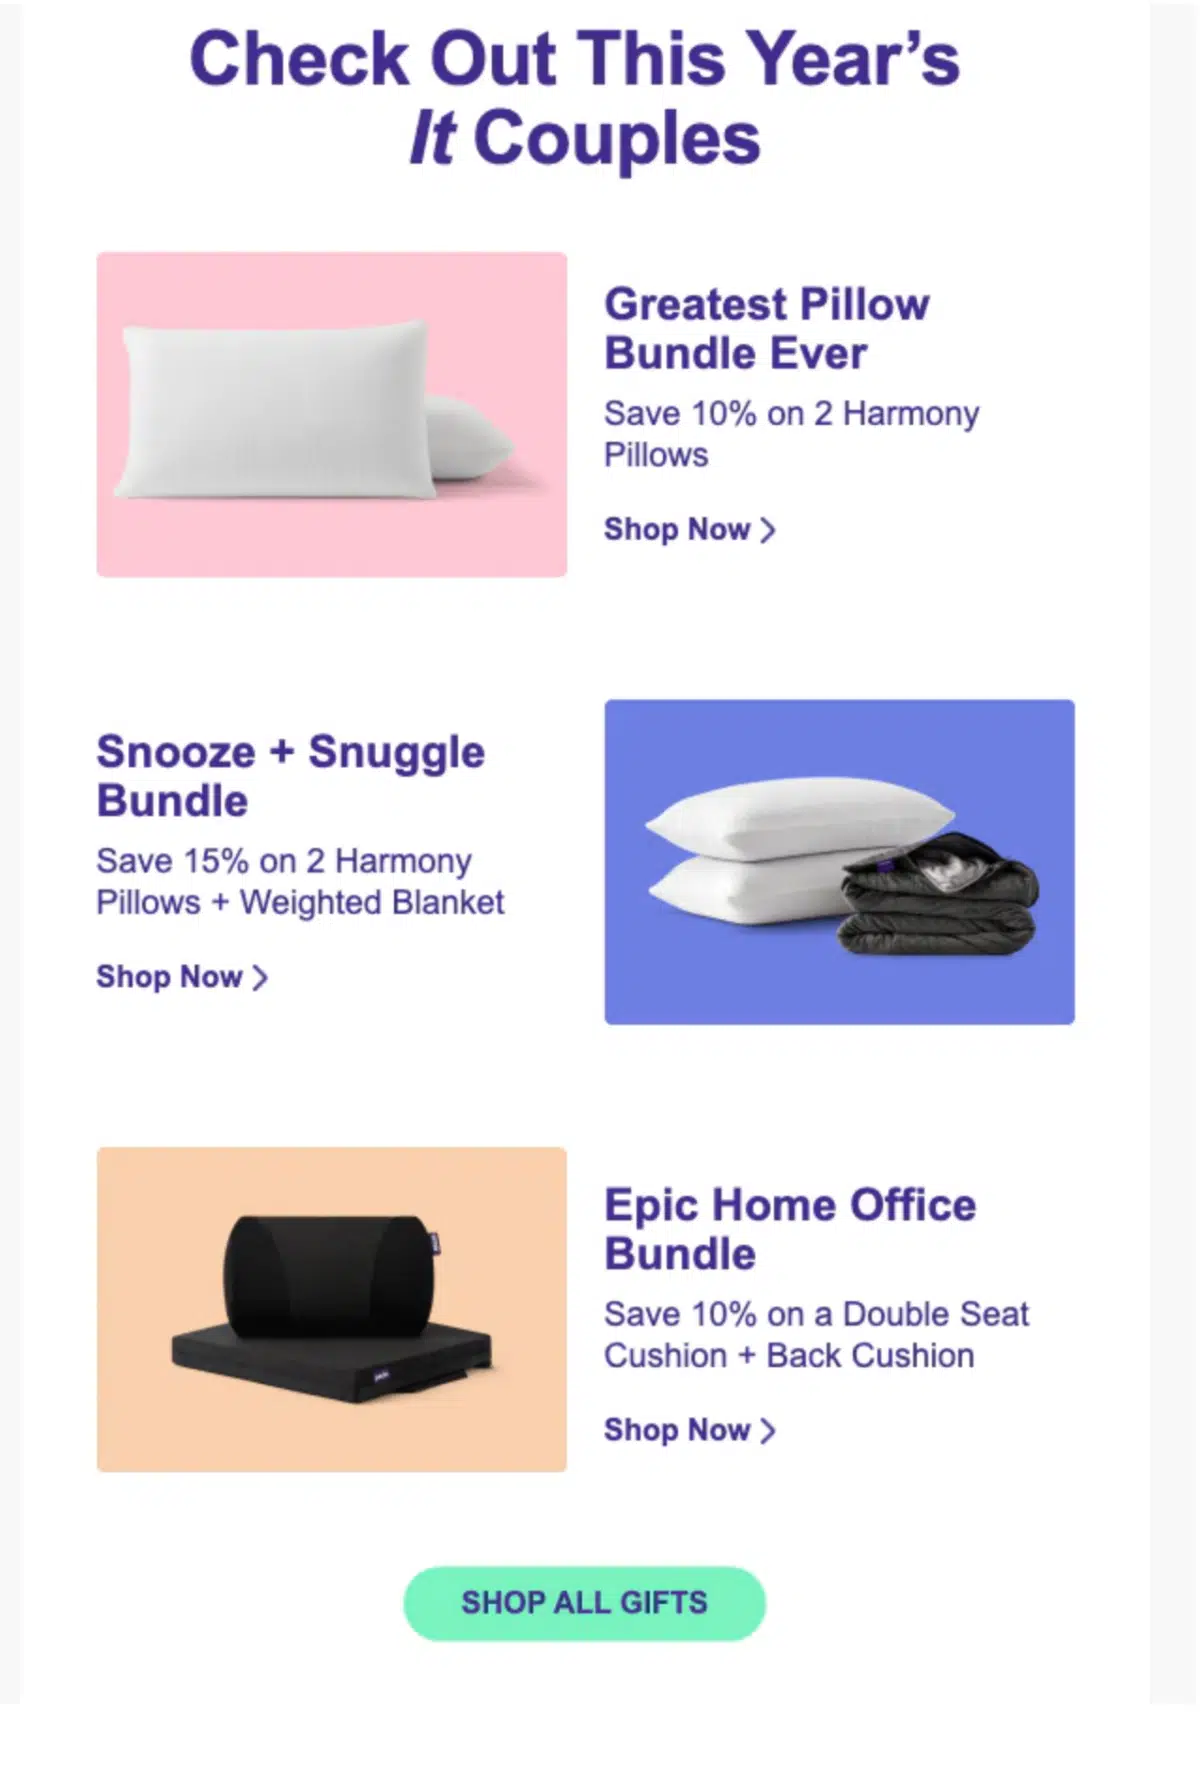 an example of bundle gift guides from pillow company Purple